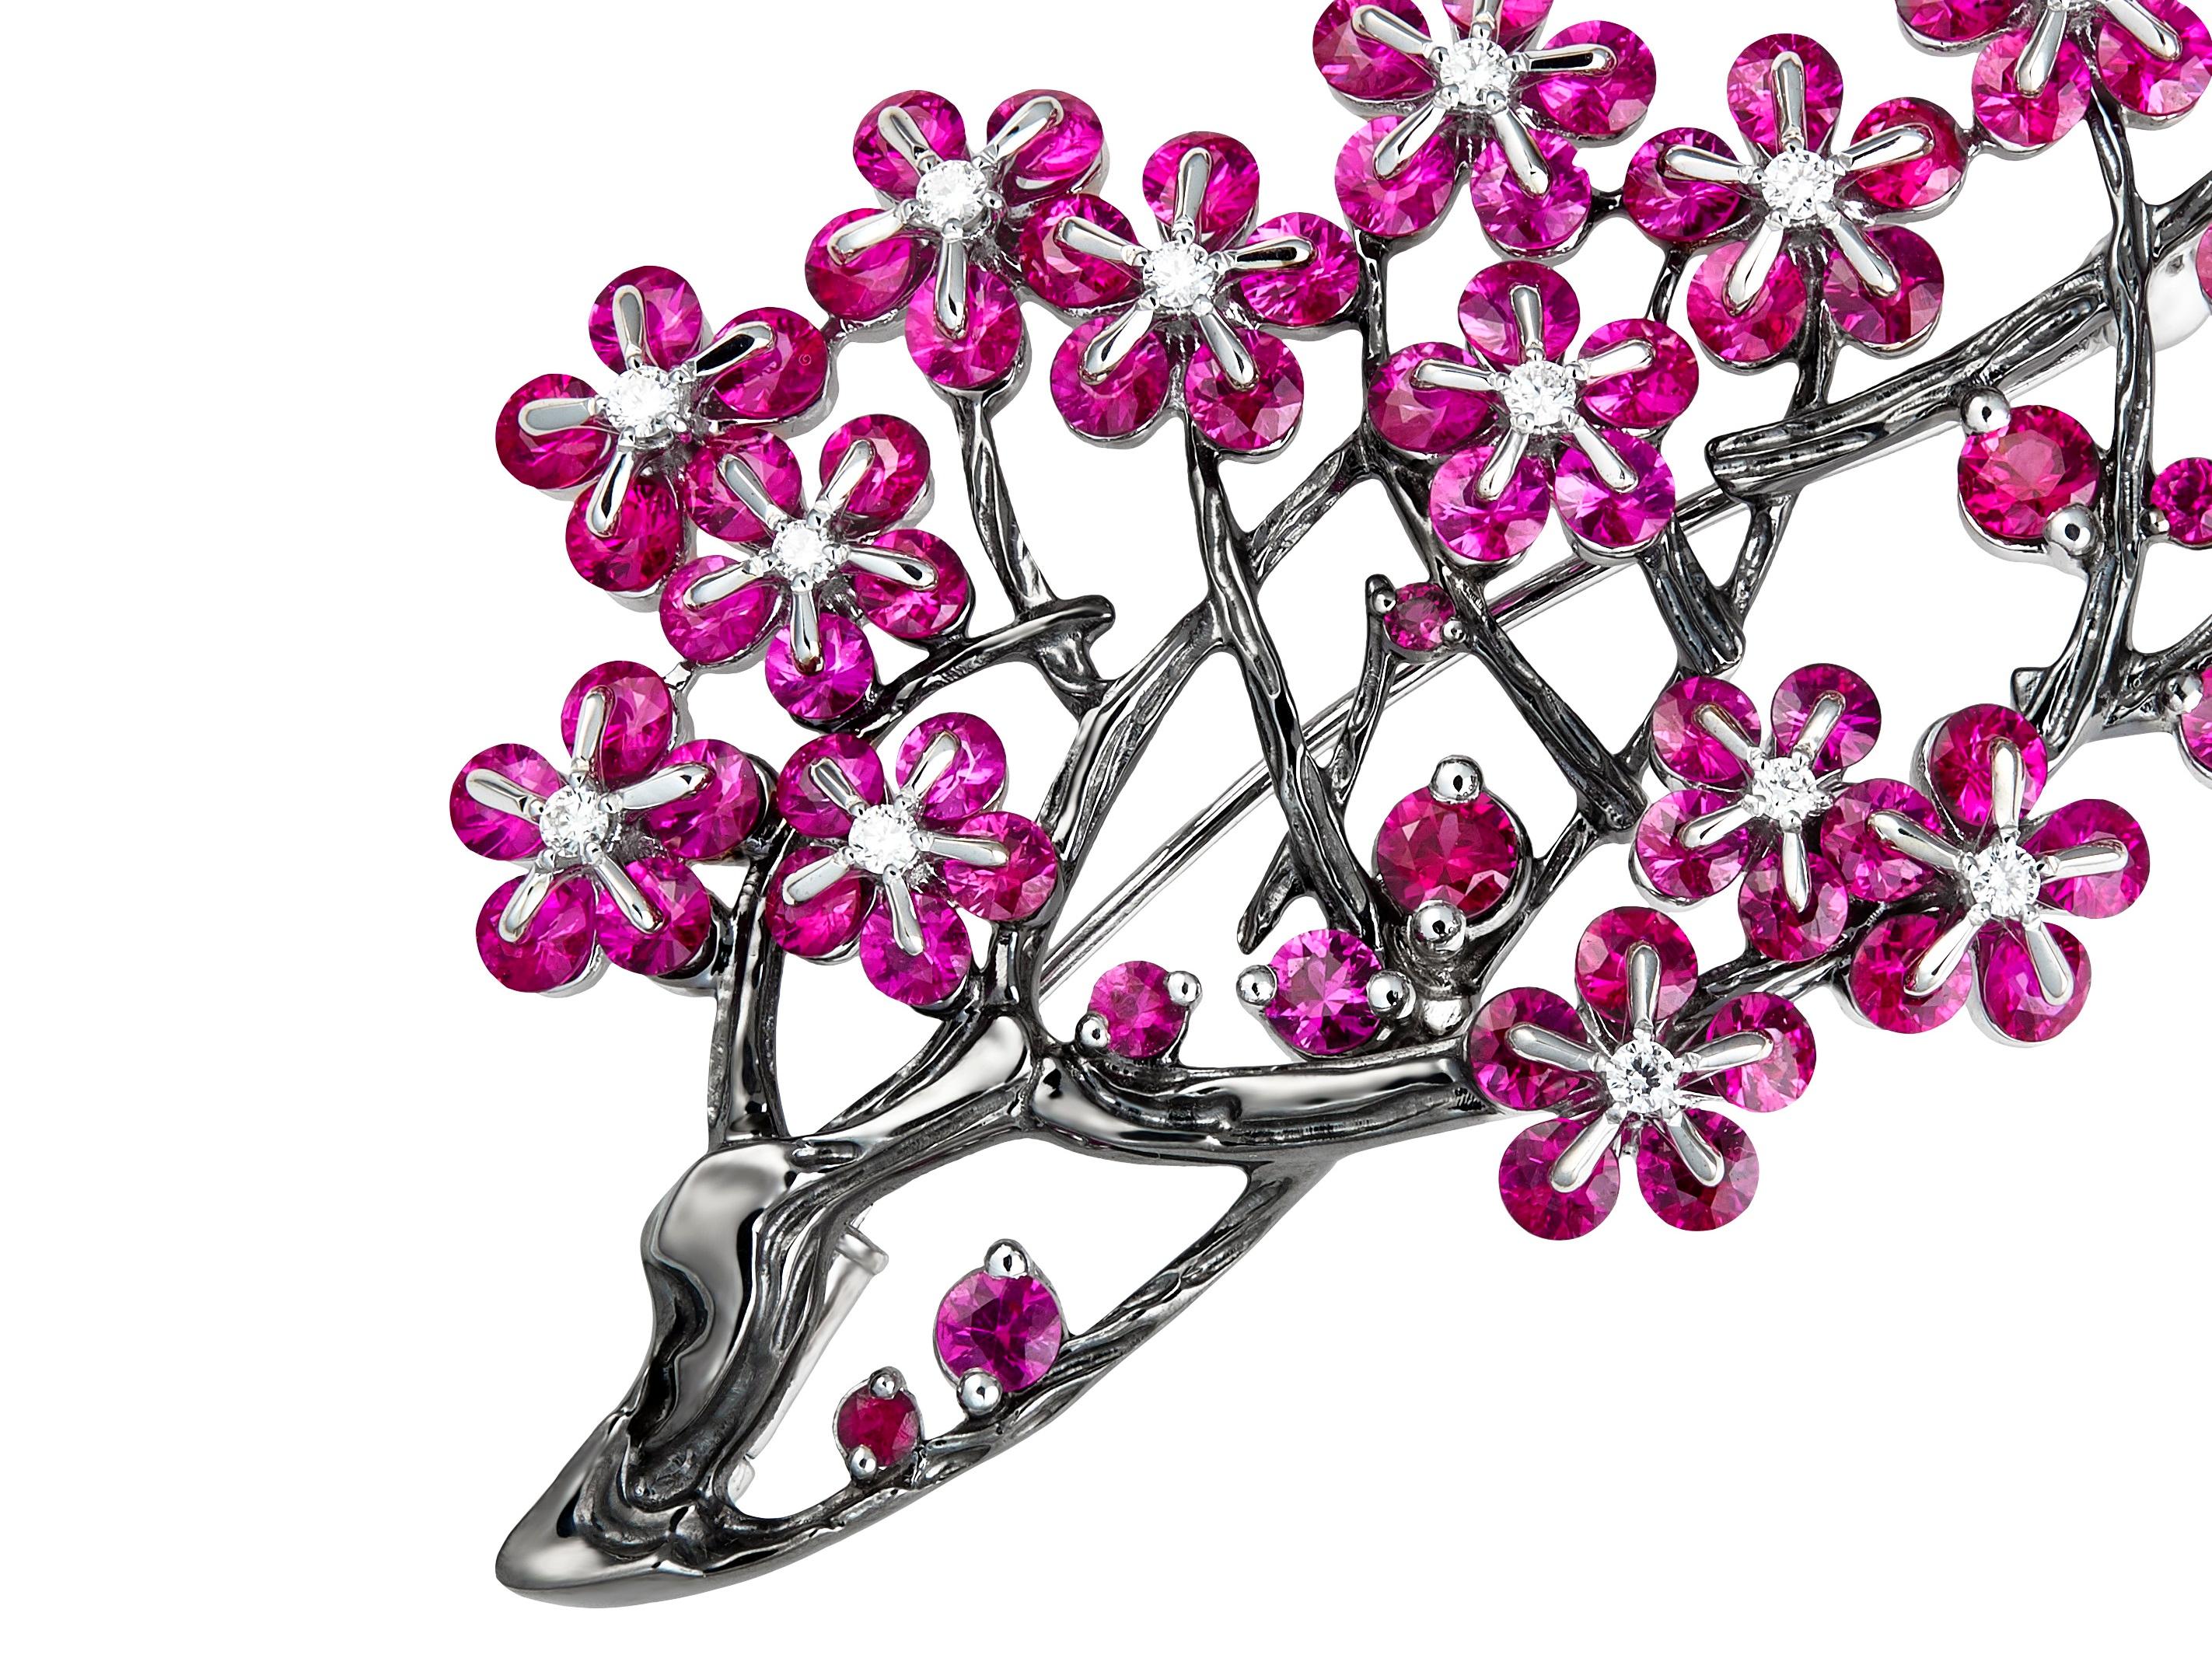 MOISEIKIN created a glamorous ruby and diamond brooch employing the patented technology that enables gems to dance and tremble. Inspired by the passionate ripe plum tree and spiritual calligraphy, the brooch is made with over 9ct top-quality rubies